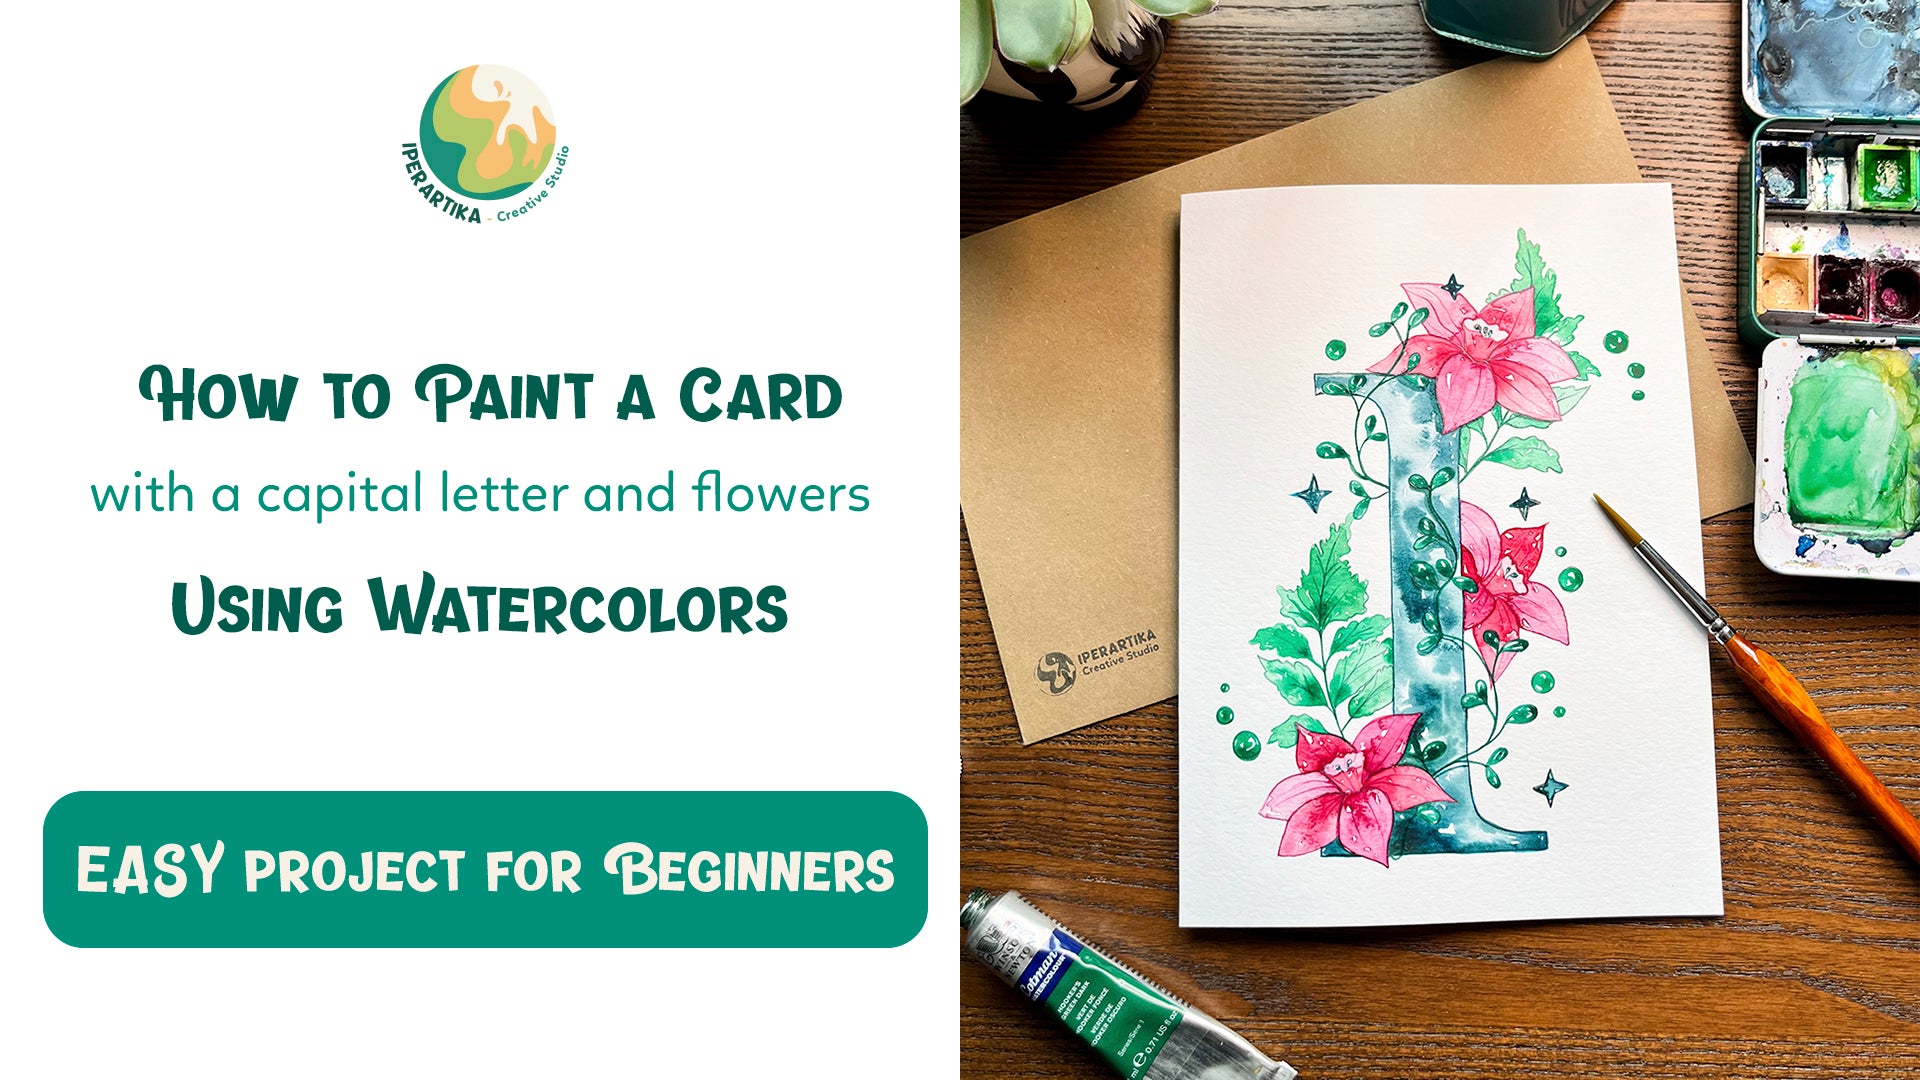 Load video: How to Paint a Card with a Capital Letter and Flowers with Watercolors_Watercolor tutorial for beginners